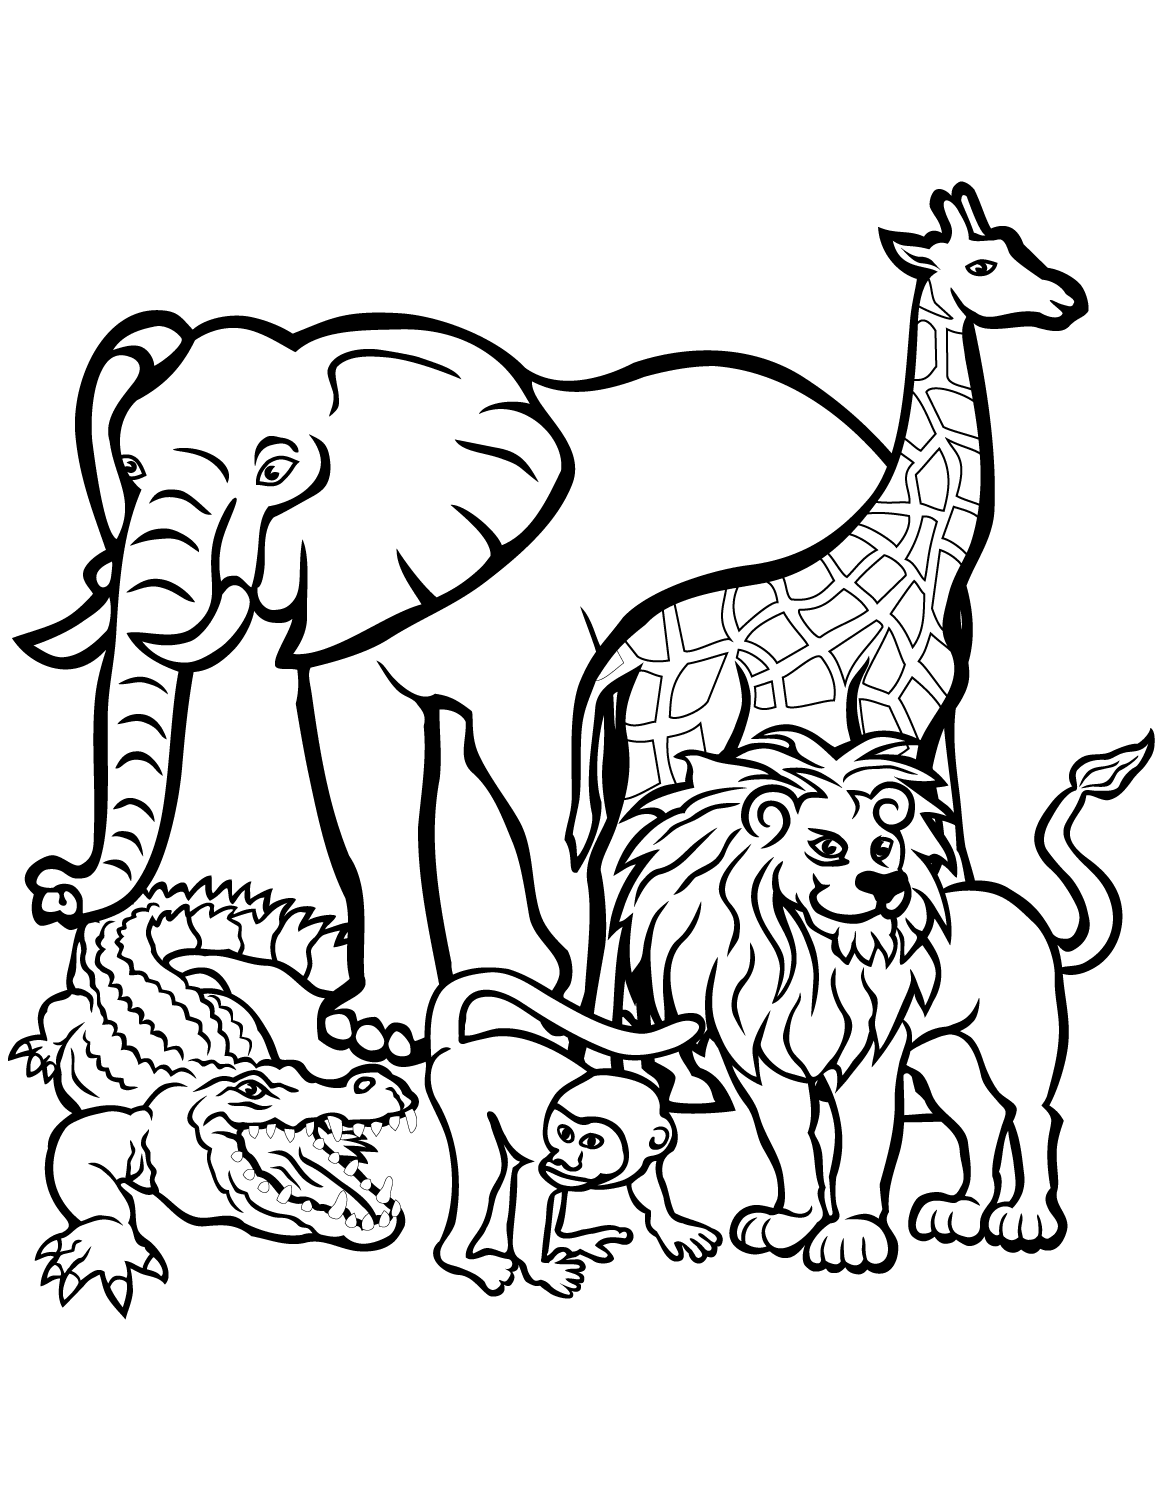 Animals In The Wild Coloring Page - Free Printable Coloring Pages for Kids